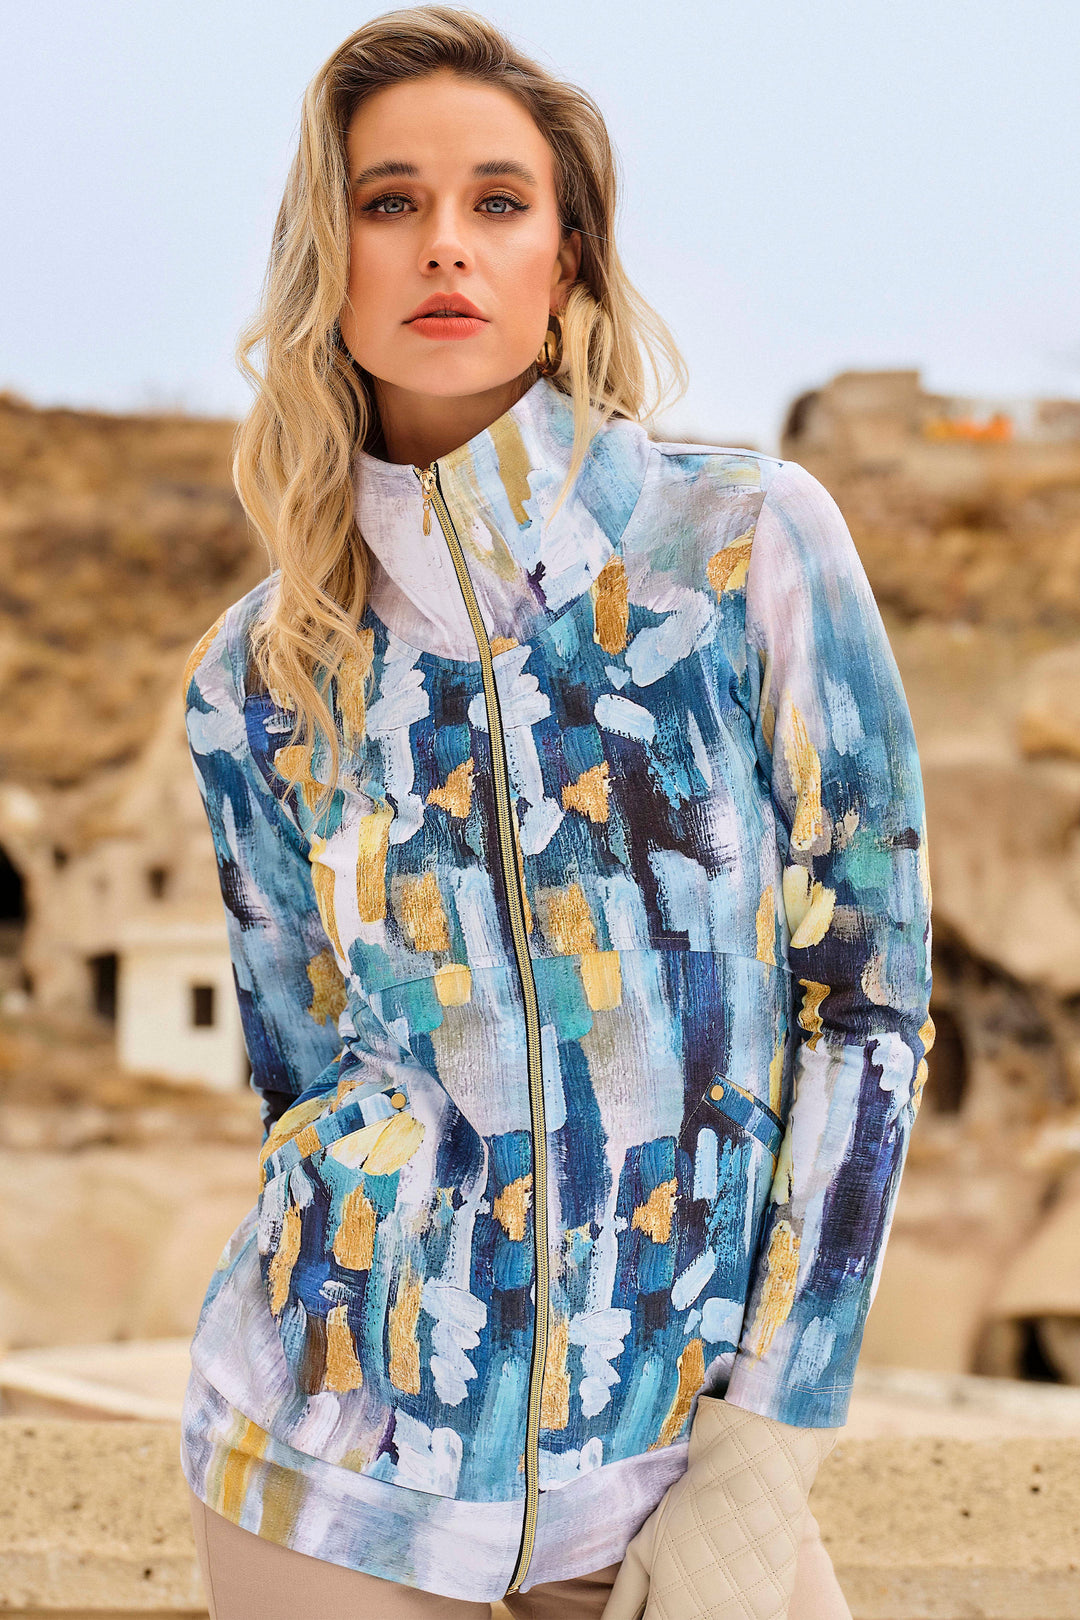 Its lovely watercolour print all-over and high neck provide an attractive look, while the stretchy cotton-blend fabric with front zipper and pockets brings comfort and convenience. 